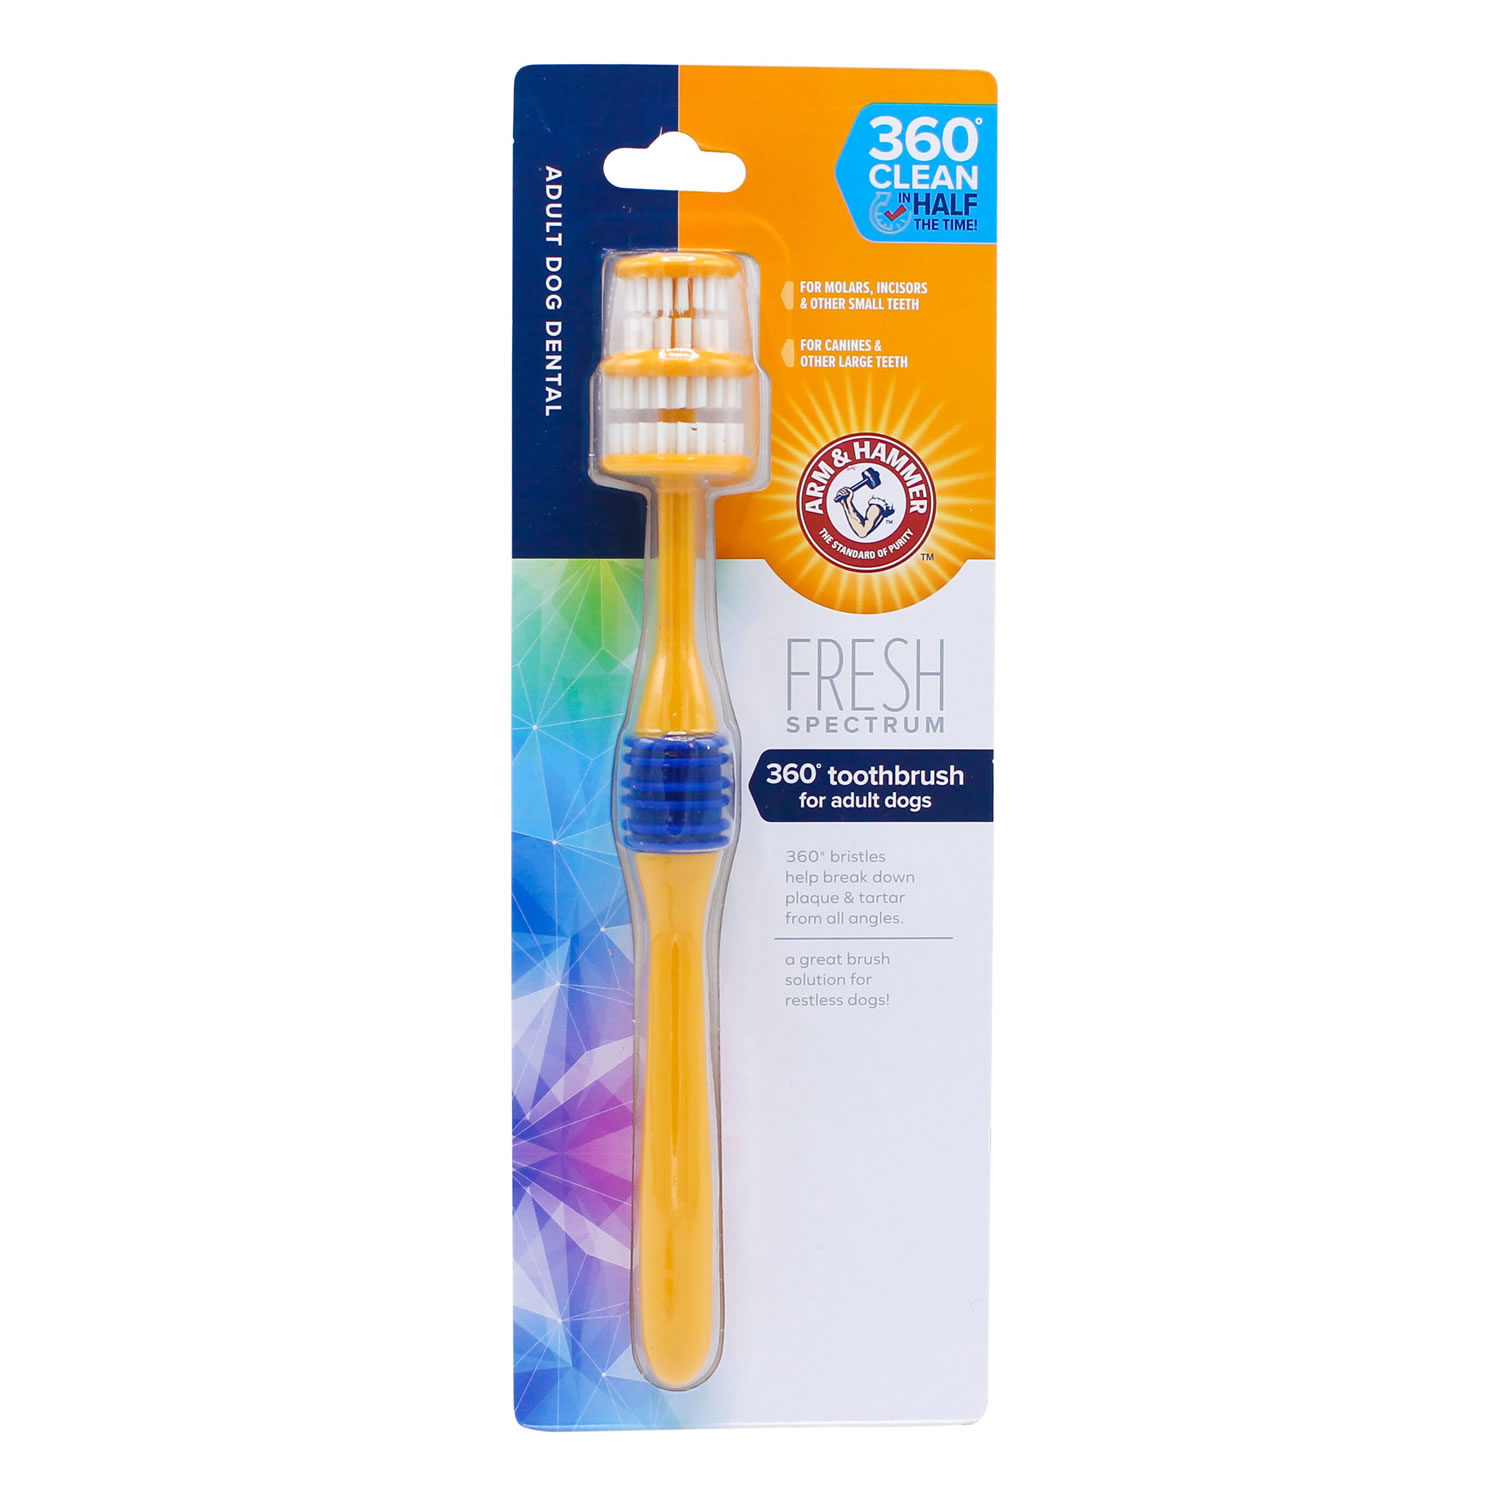 ARM & HAMMER FRESH 360 DEGREE TOOTHBRUSH DOGS DOGS